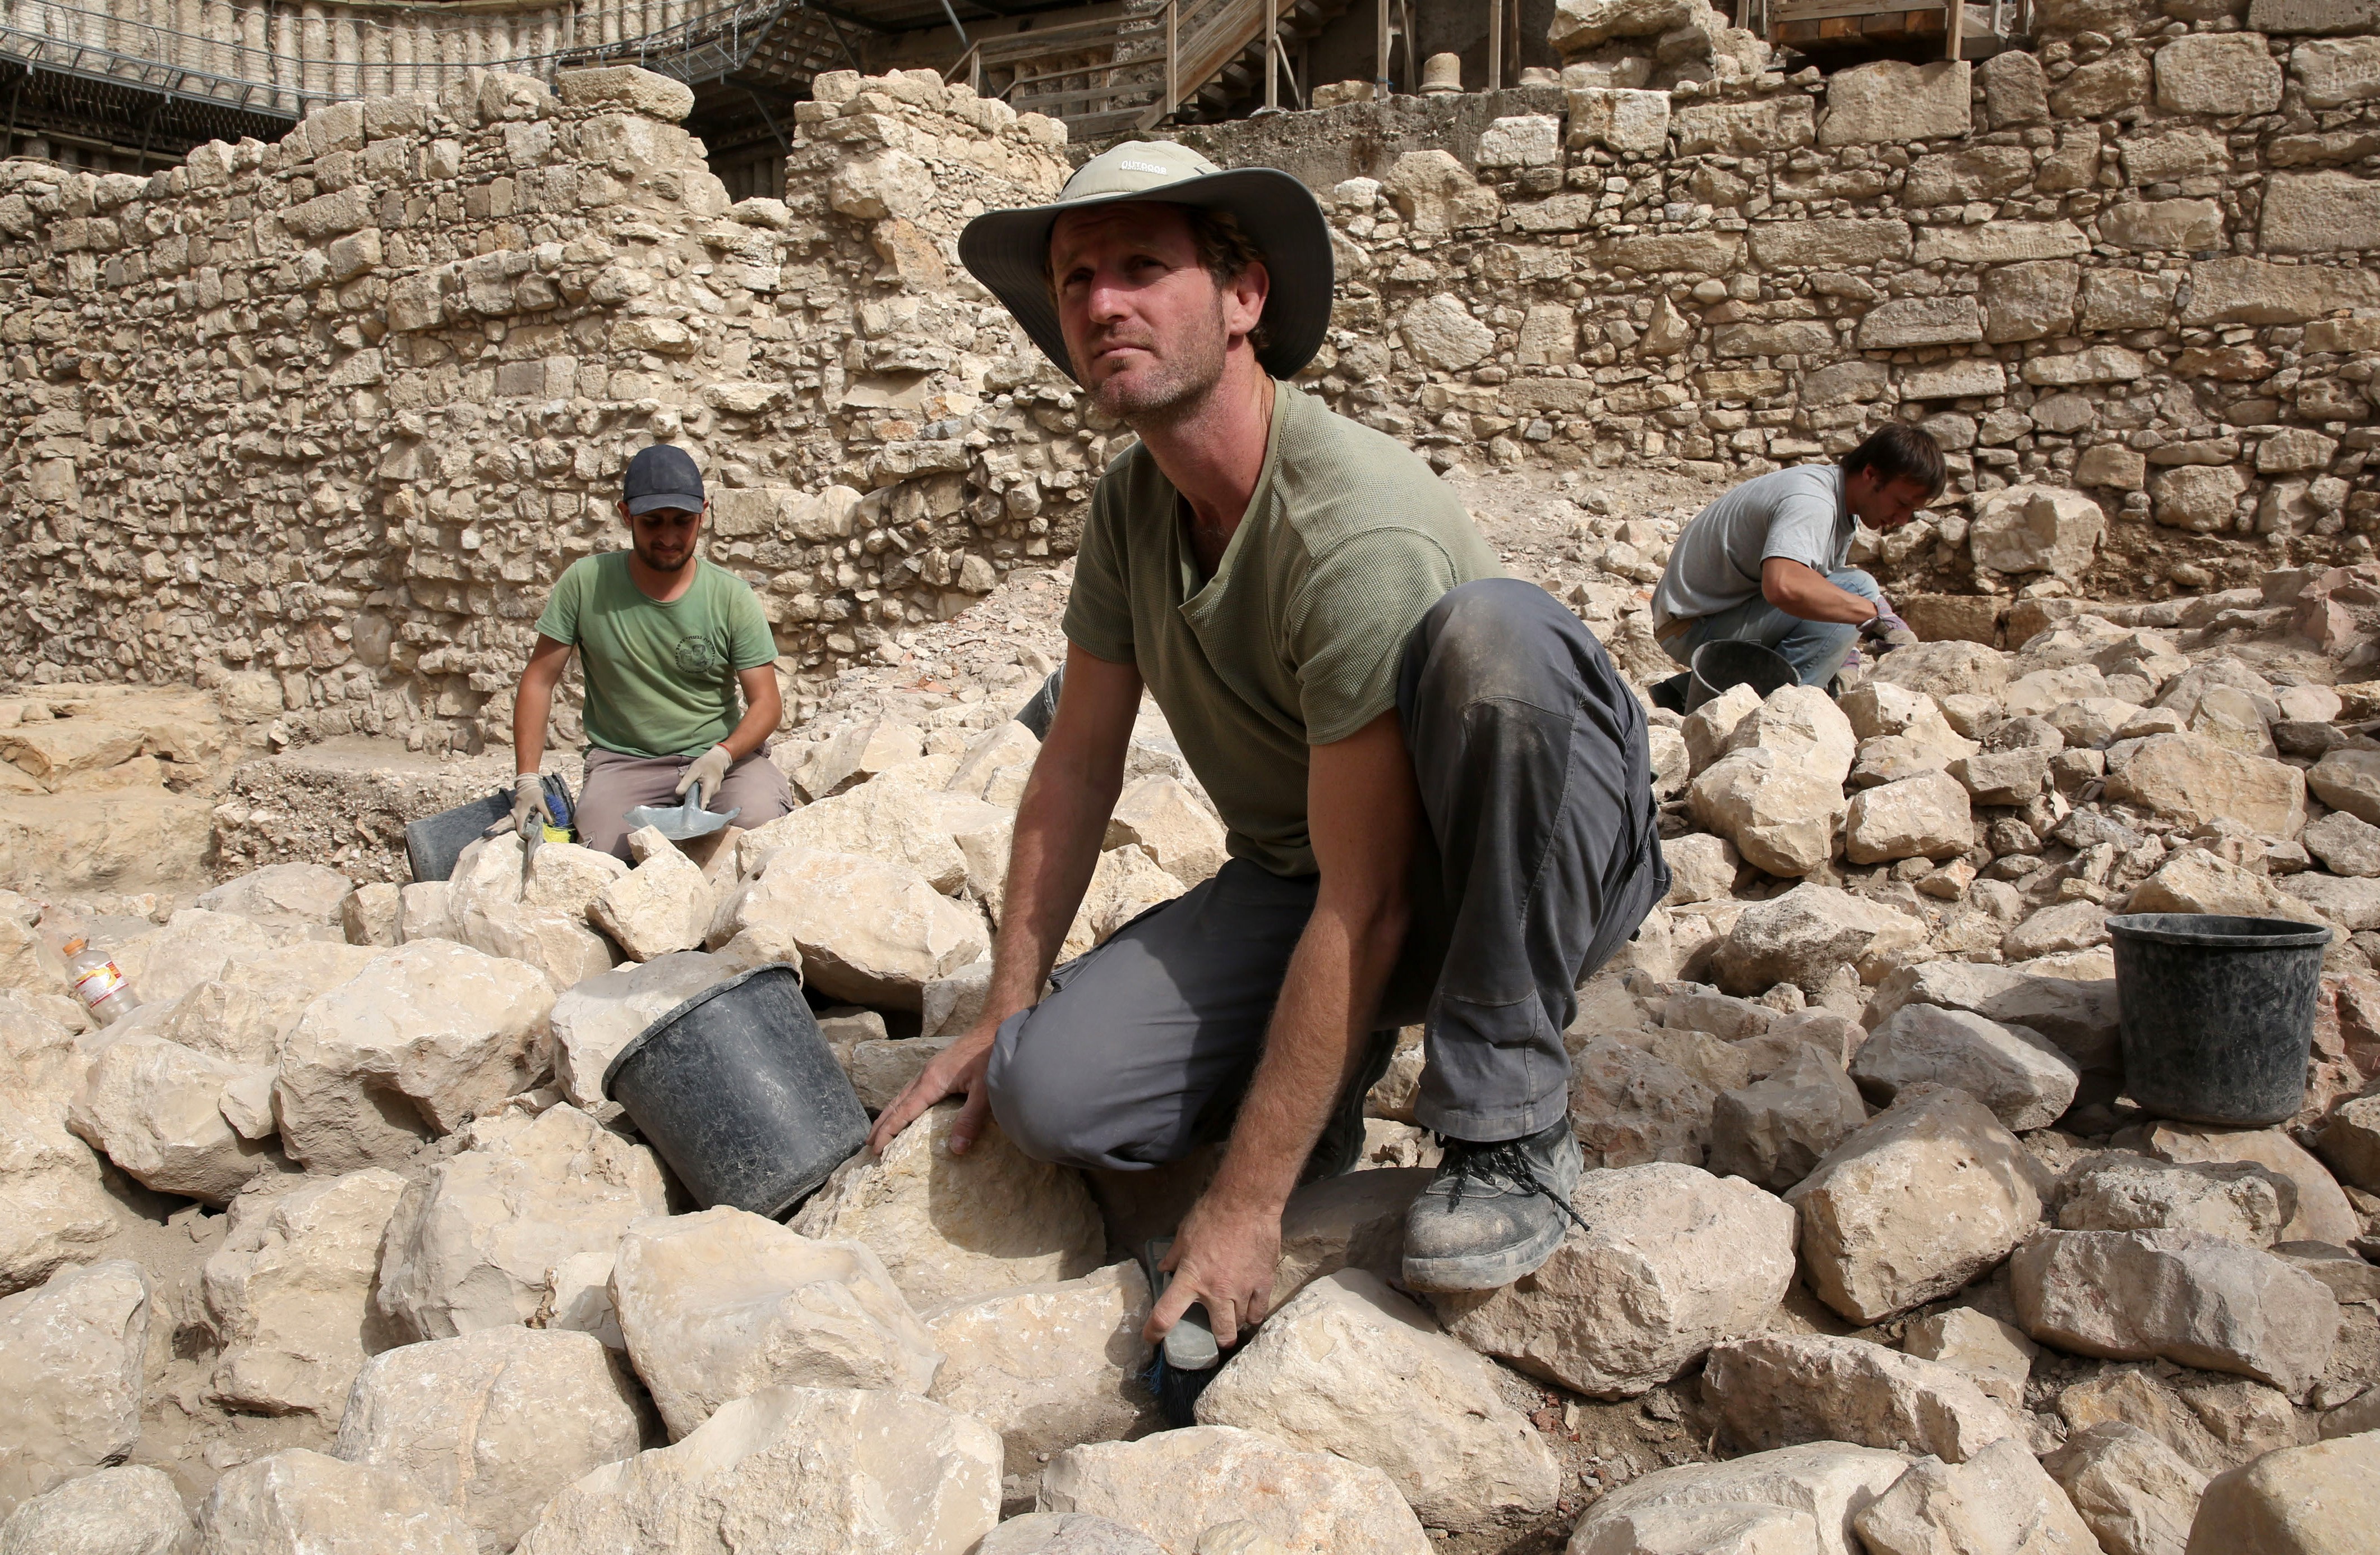 Workers at the excavation site of Acra